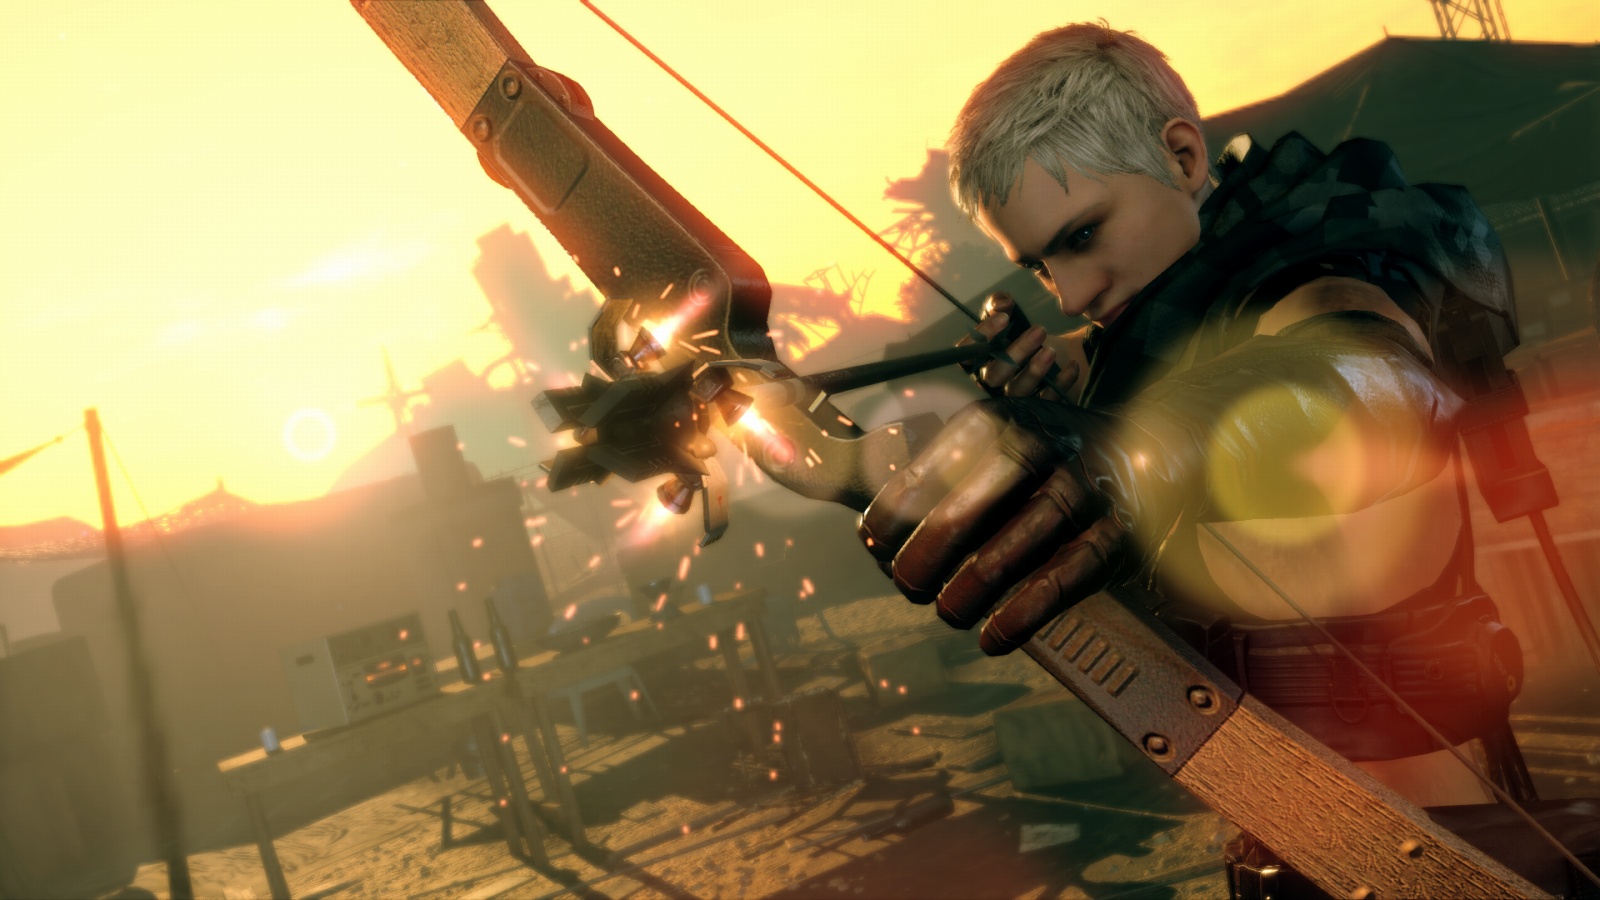 Media asset in full size related to 3dfxzone.it news item entitled as follows: Konami mostra una demo del gameplay del game Metal Gear Survive | Image Name: news24952_Metal-Gear-Survive_Screenshot_5.jpg